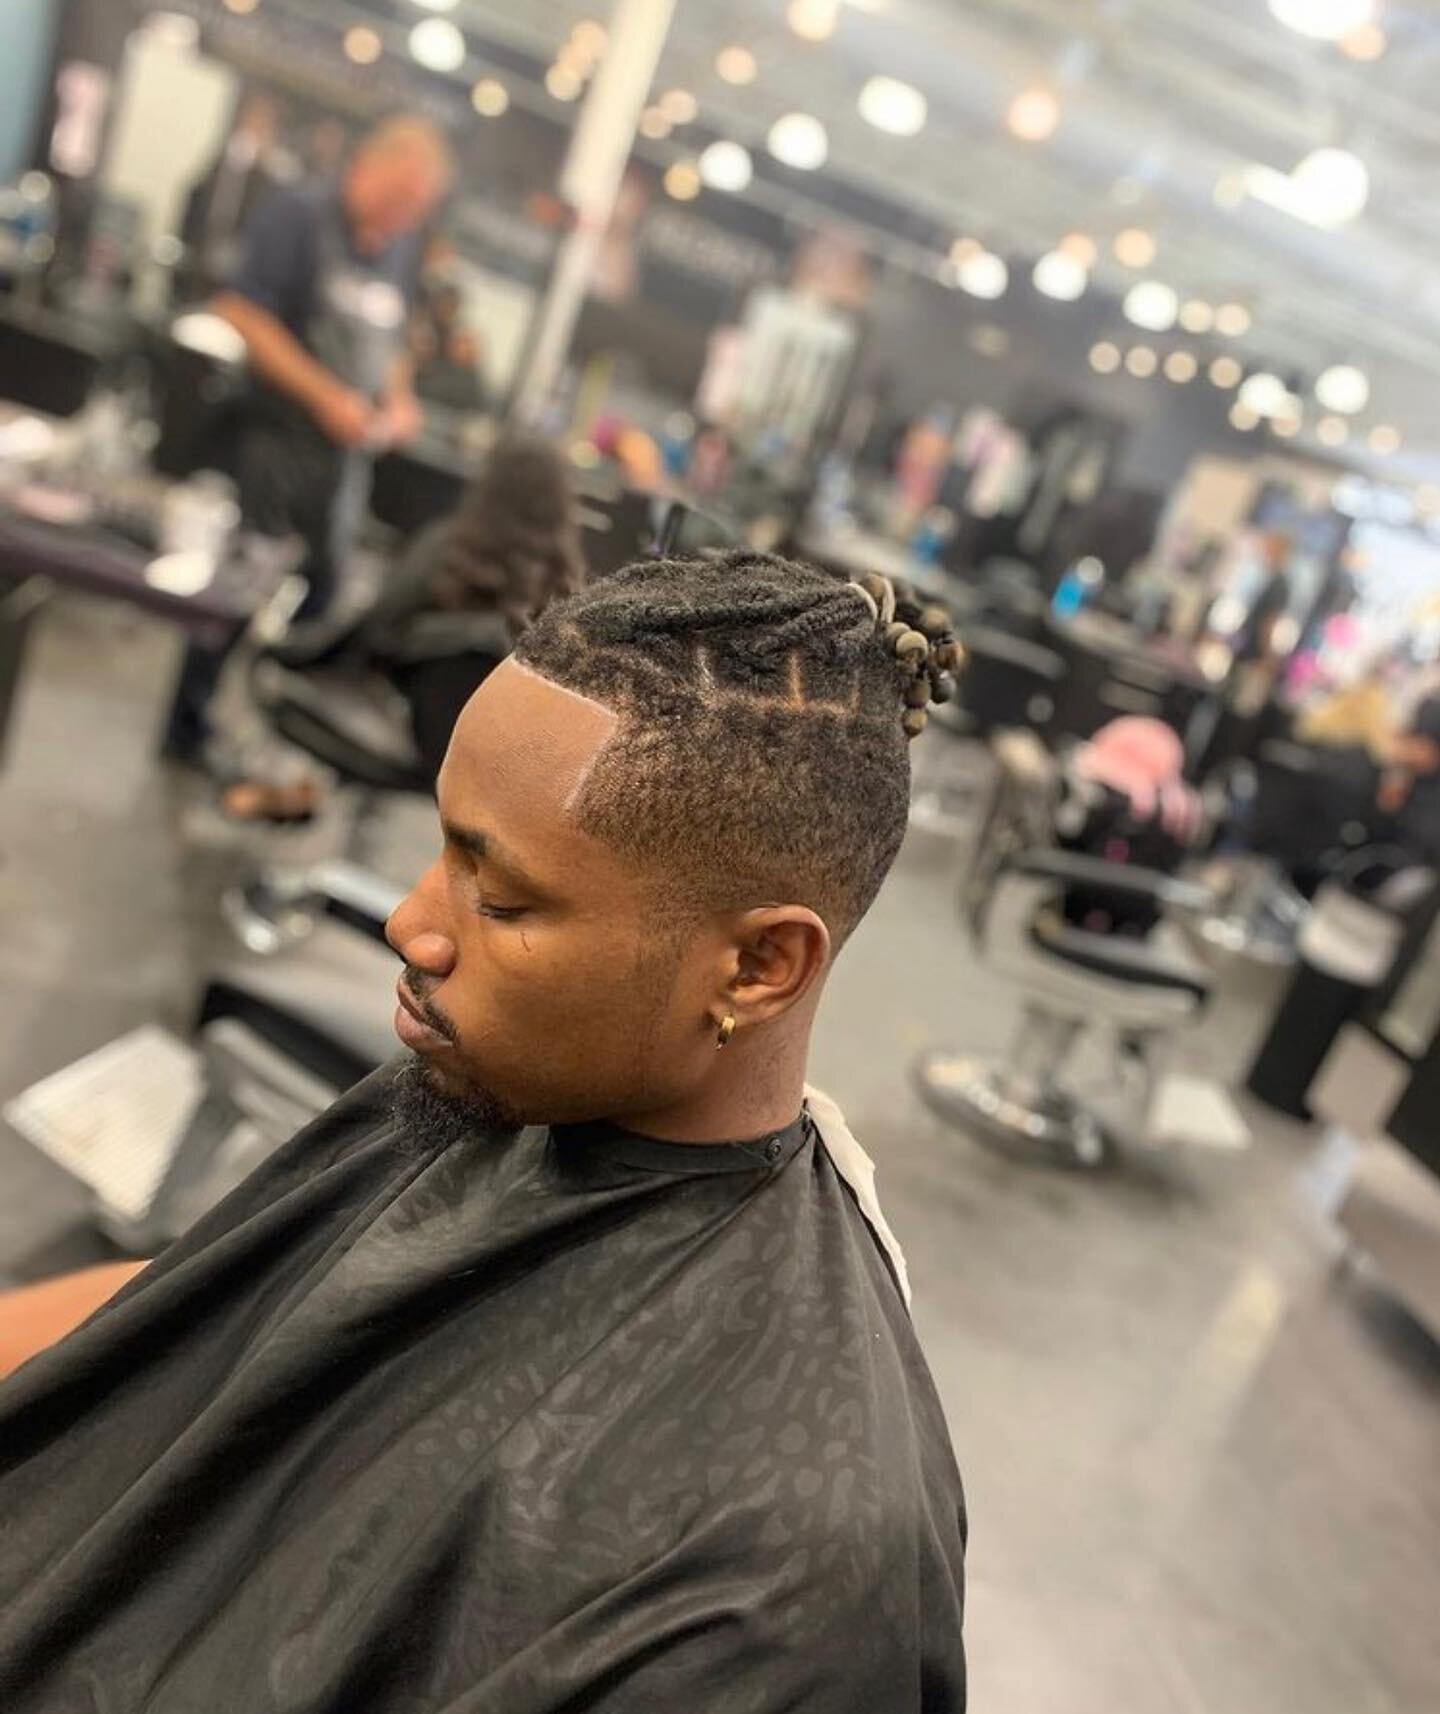 Our barbers have some serious talent!  Come check them out 💈
Barber: @fadeawaykutz_